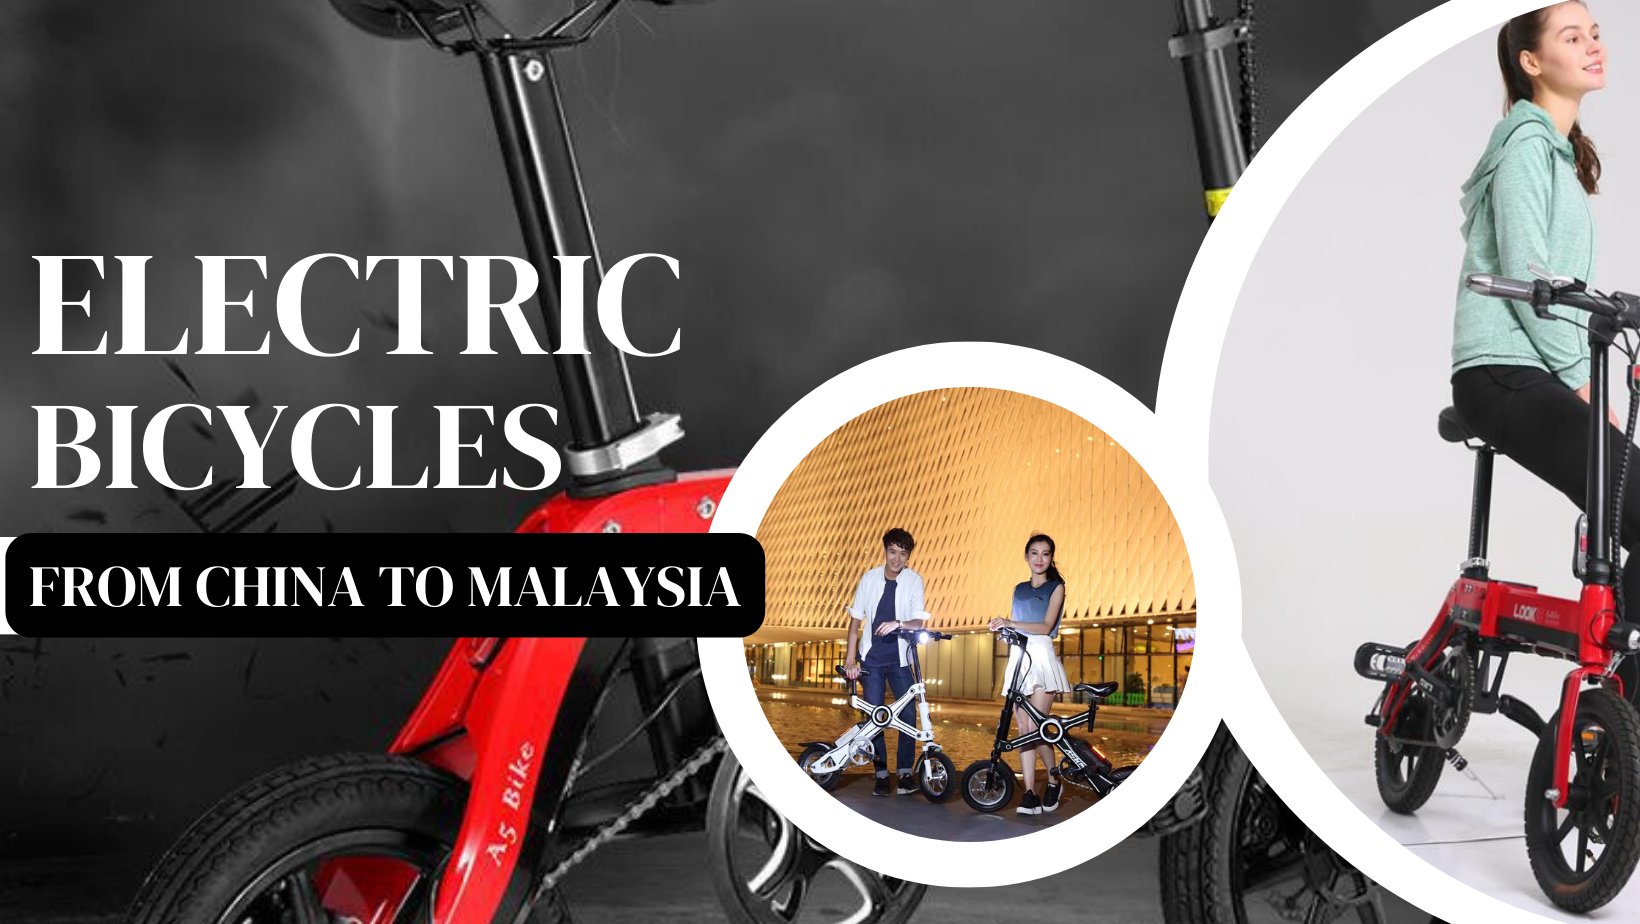 Importing Electric Bicycles from China to Malaysia